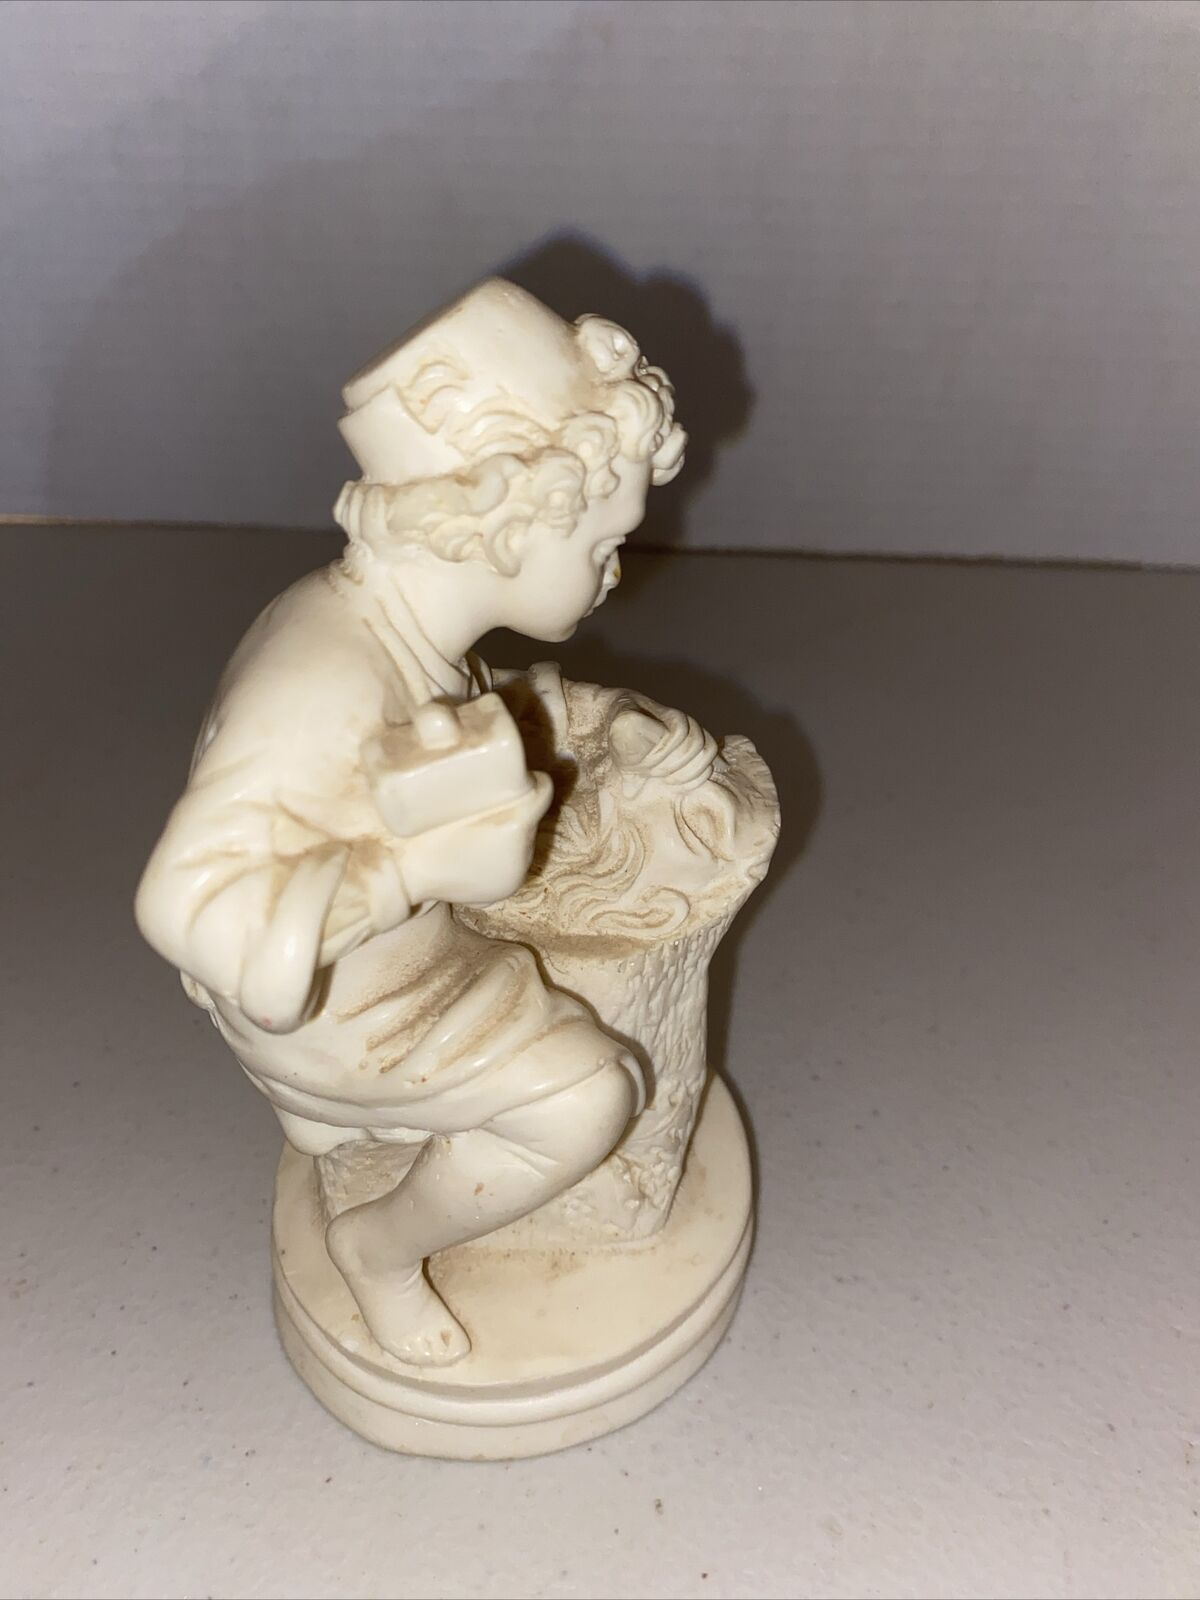 Young Michelangelo 5.75” Sculptor with Chisel Resin Sculpture Statue Made Italy